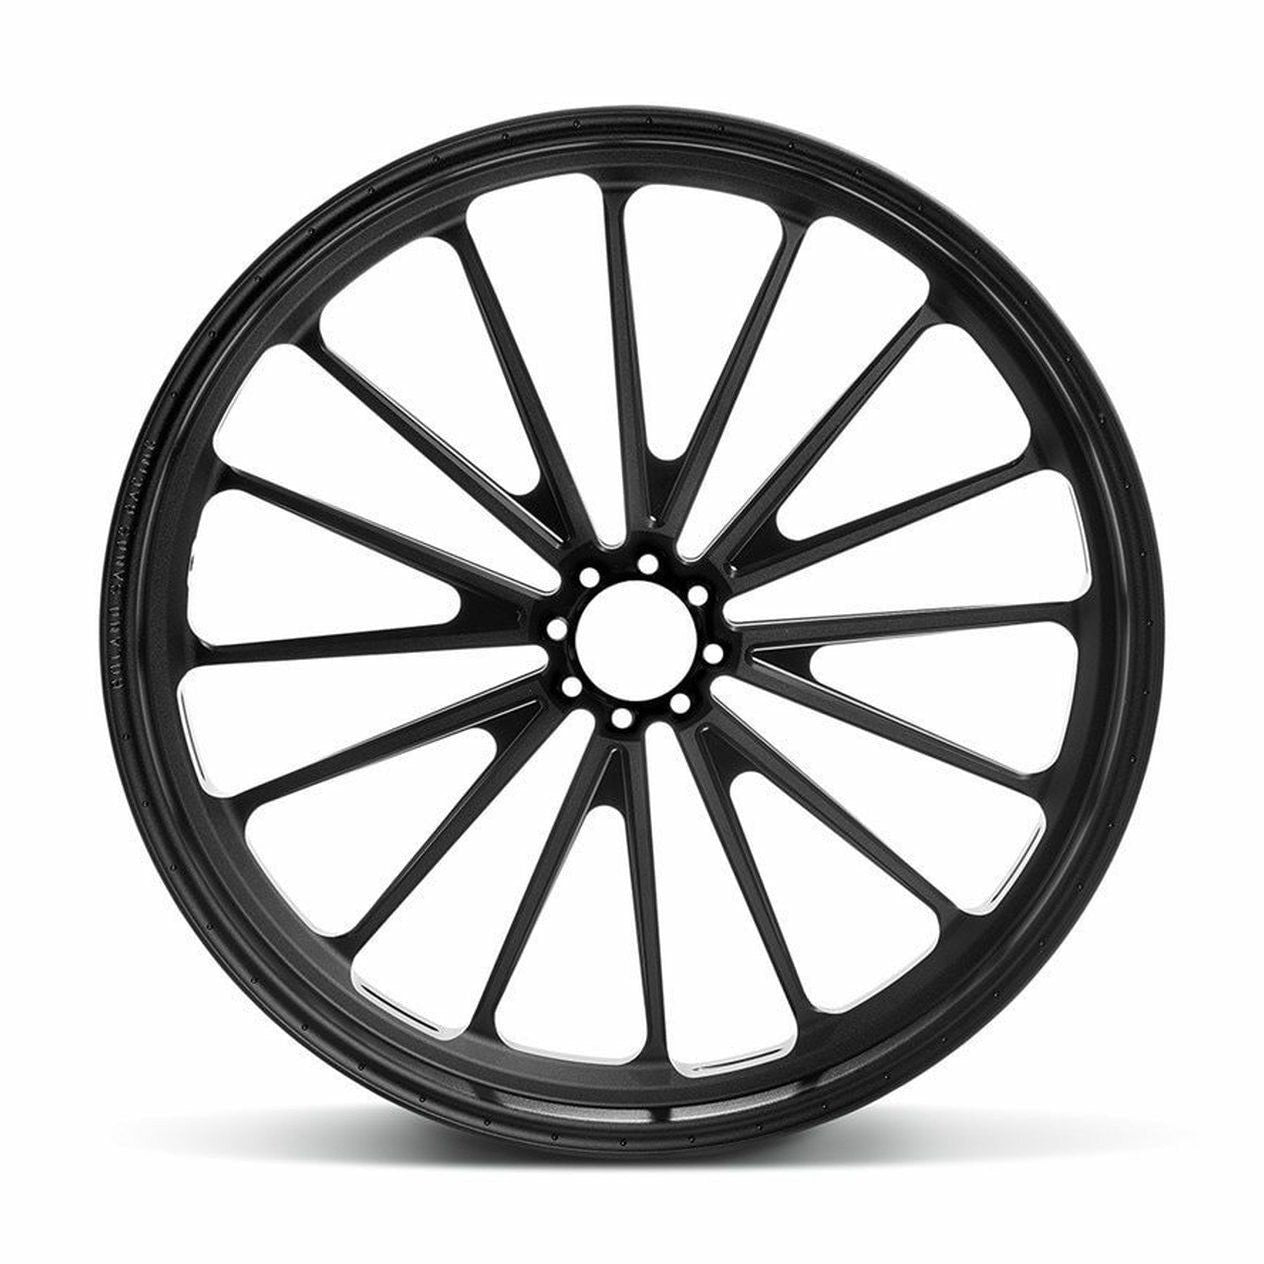 Traction Forged DTX Flat Track Front Race Wheel